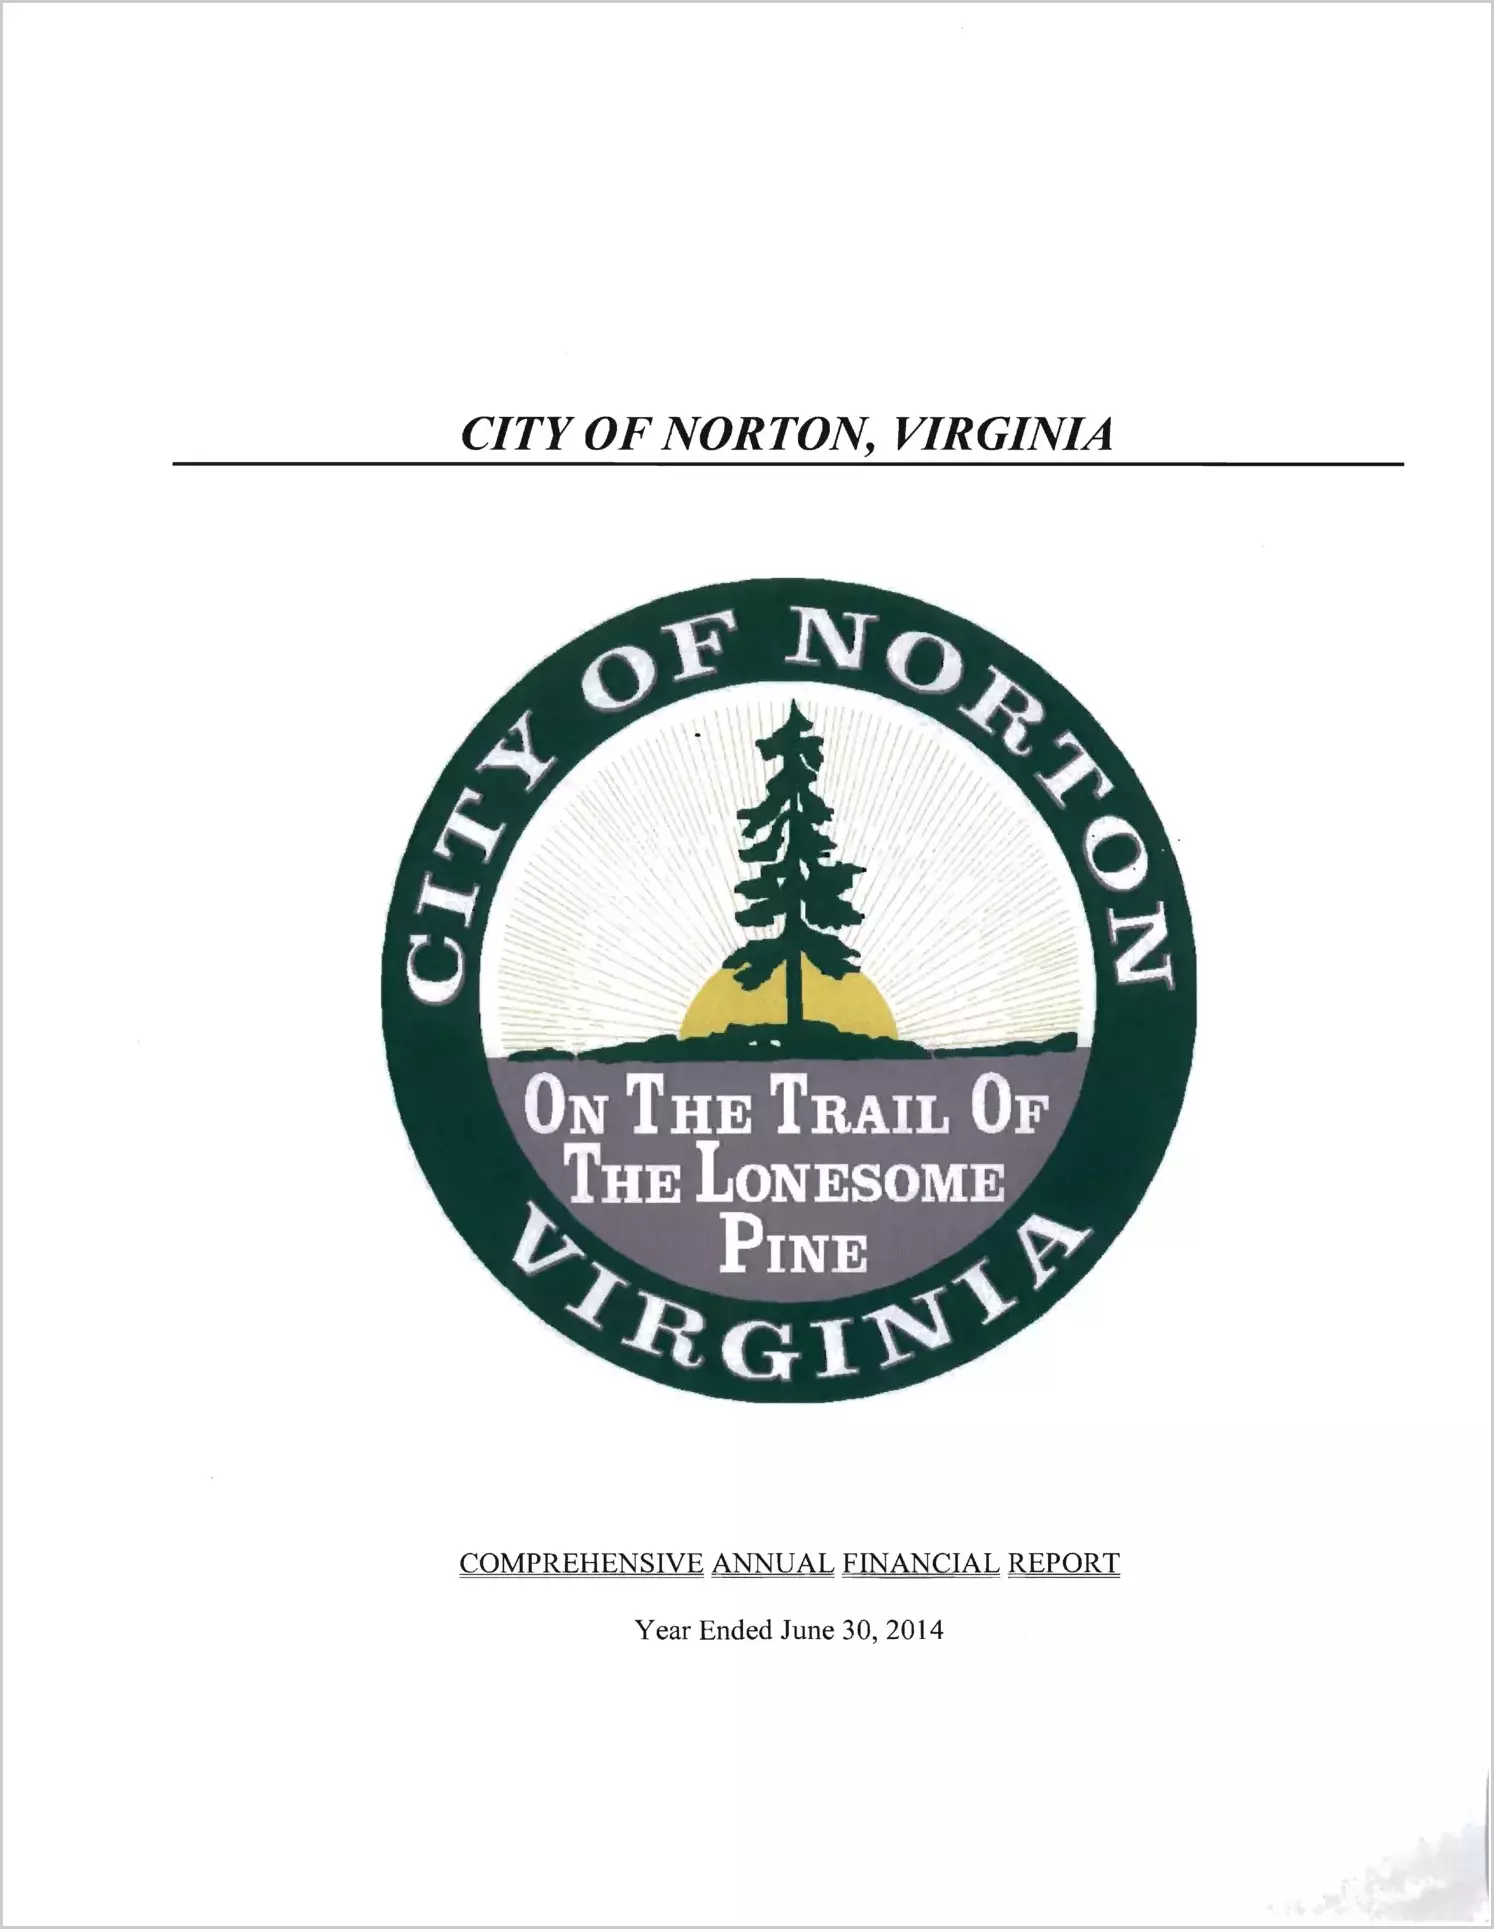 2014 Annual Financial Report for City of Norton